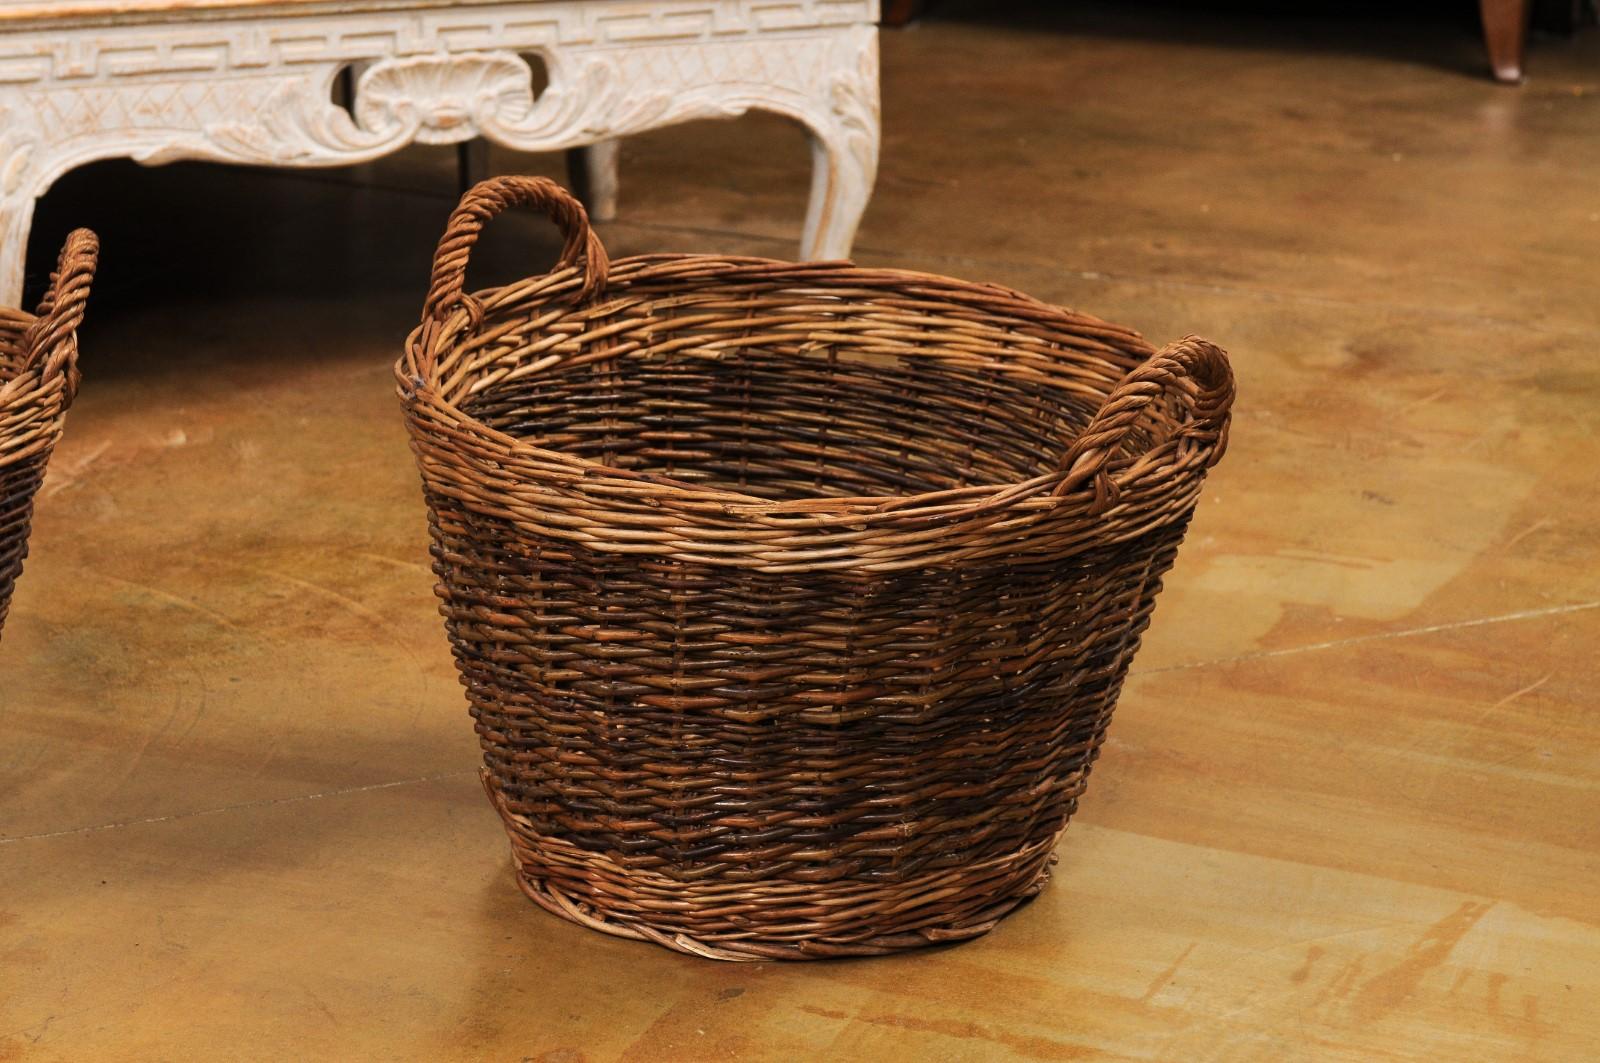 Woven Handmade English Two Toned Wicker Baskets from Devon with Double Handles, Each For Sale